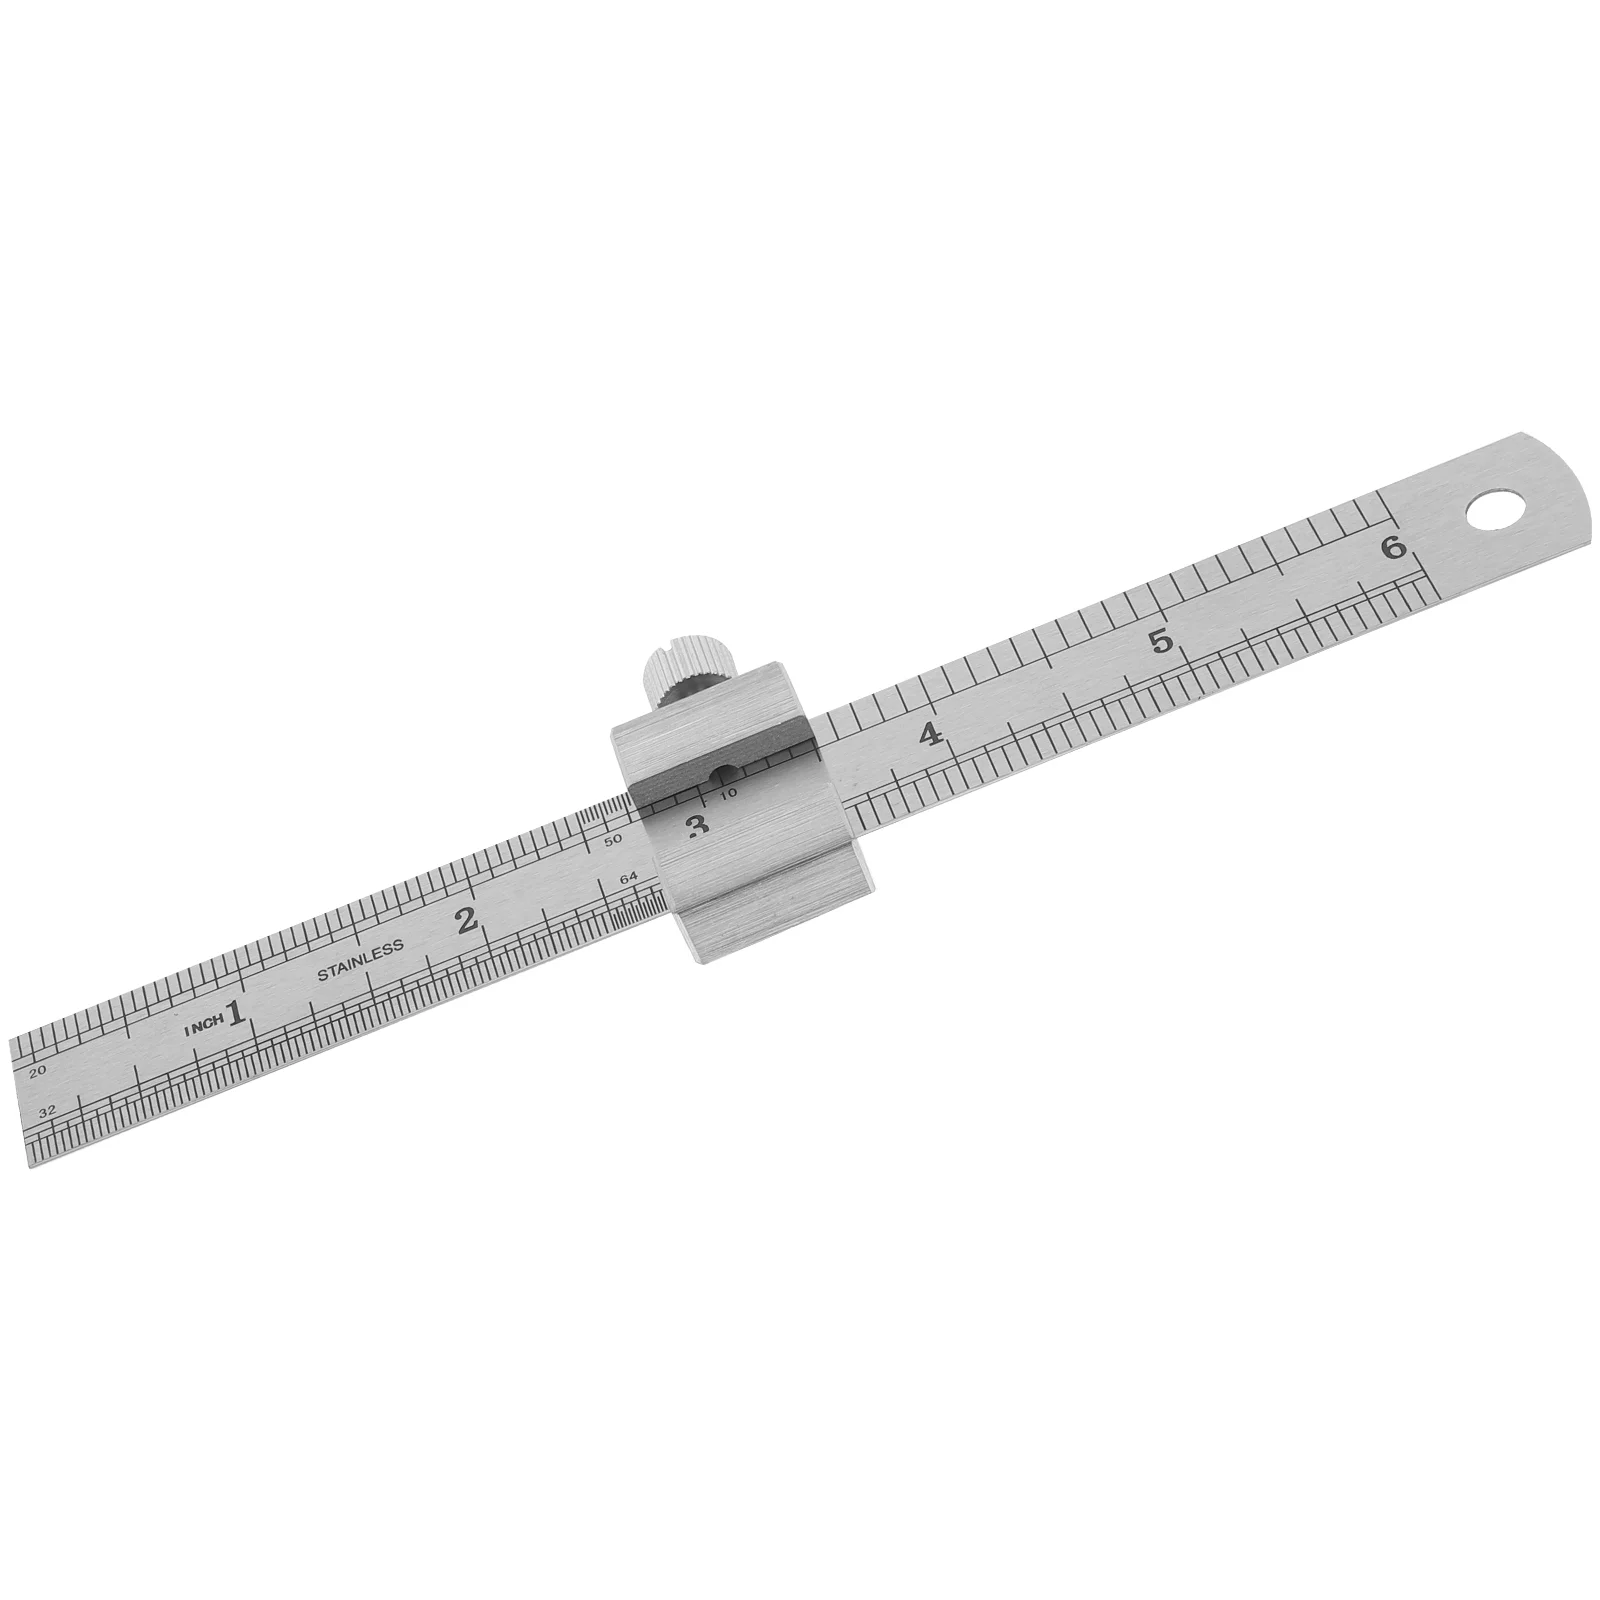 

Ruler Measuring Woodworking Gauge Straight Steel Stainless Scale Rulers Clip Stop Fence Precision Marking Gaps Stopper Angle